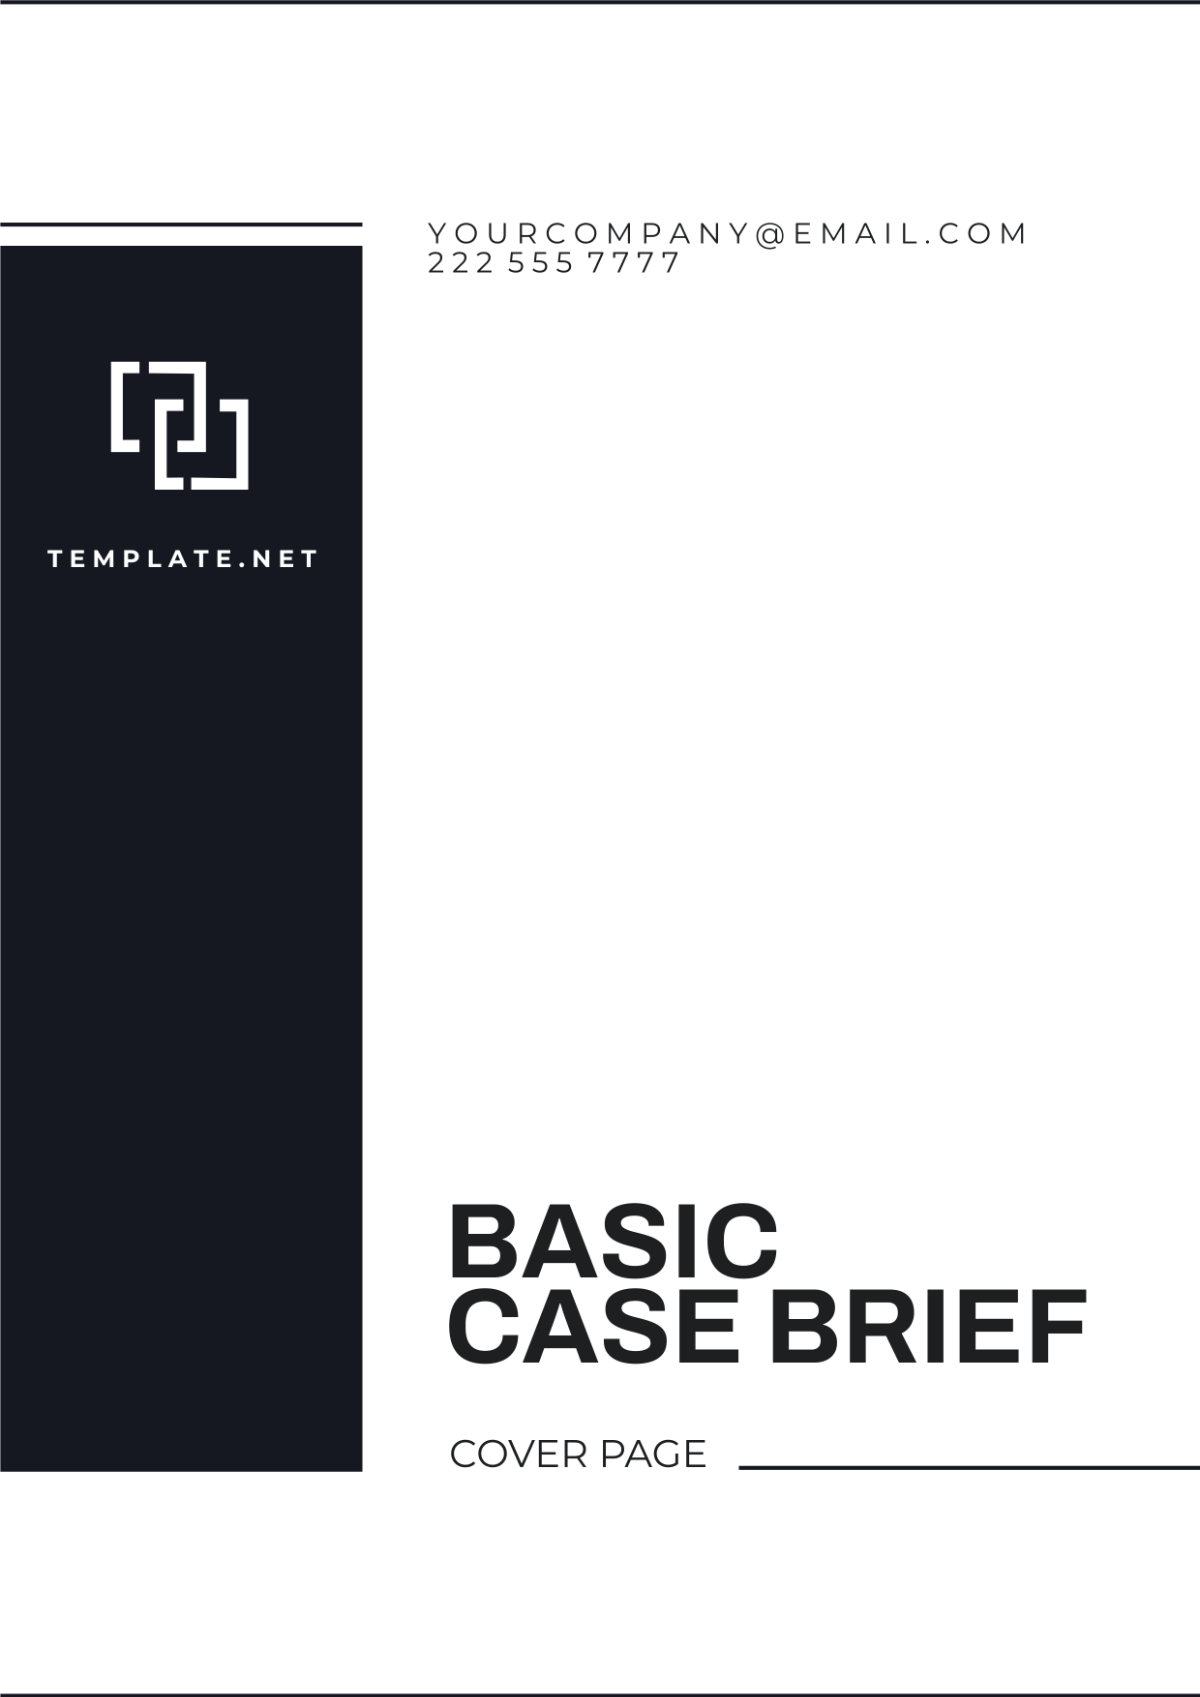 Basic Case Brief Cover Page